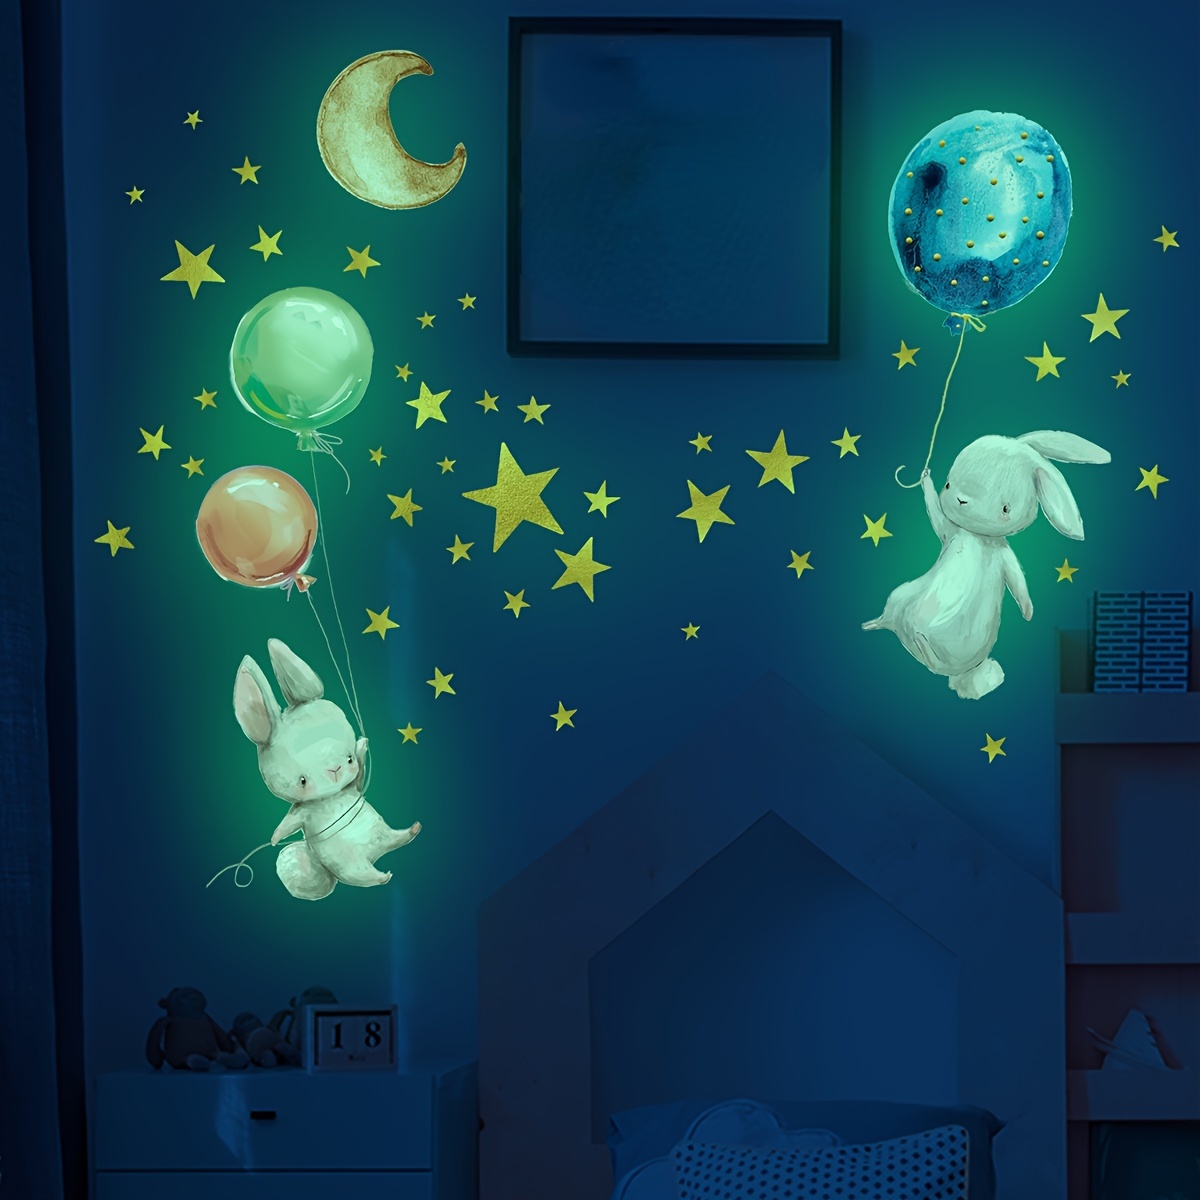 

Brighten Up Your Room With These Adorable Cartoon Luminous Wall Stickers!